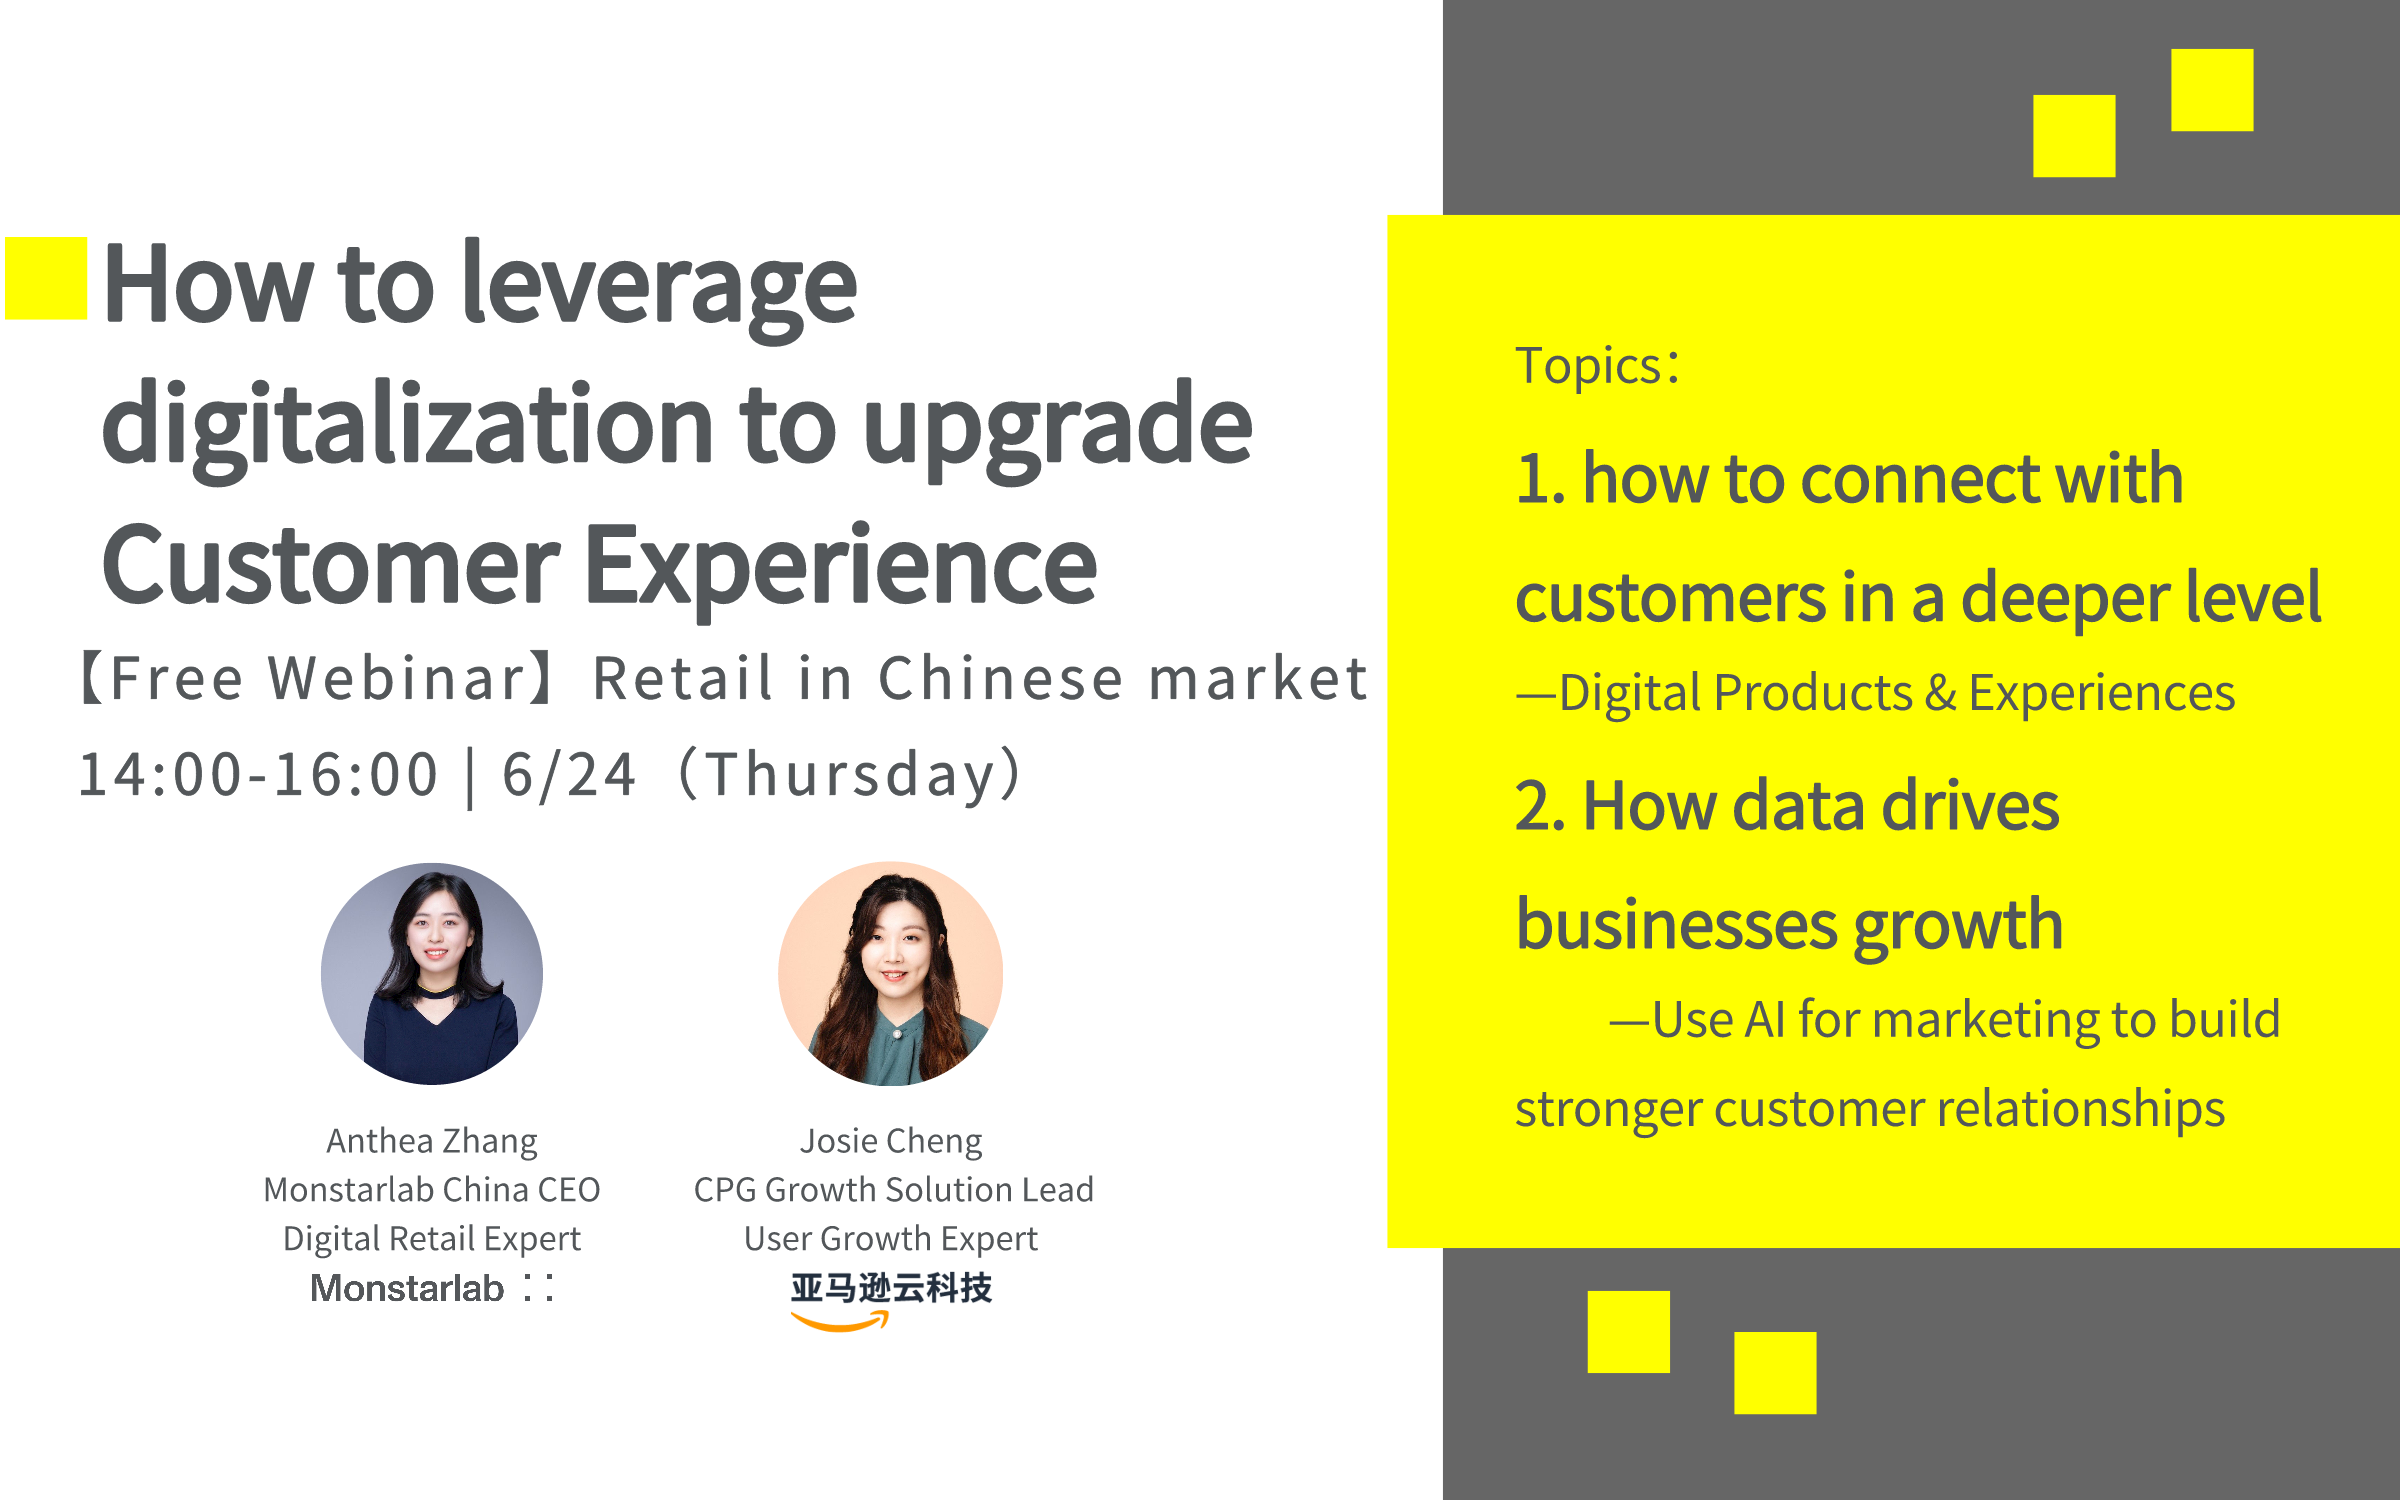 【Closed】【Free Webinar】6/24 Retail in Chinese market | How to leverage digitalization to upgrade Customer Experience